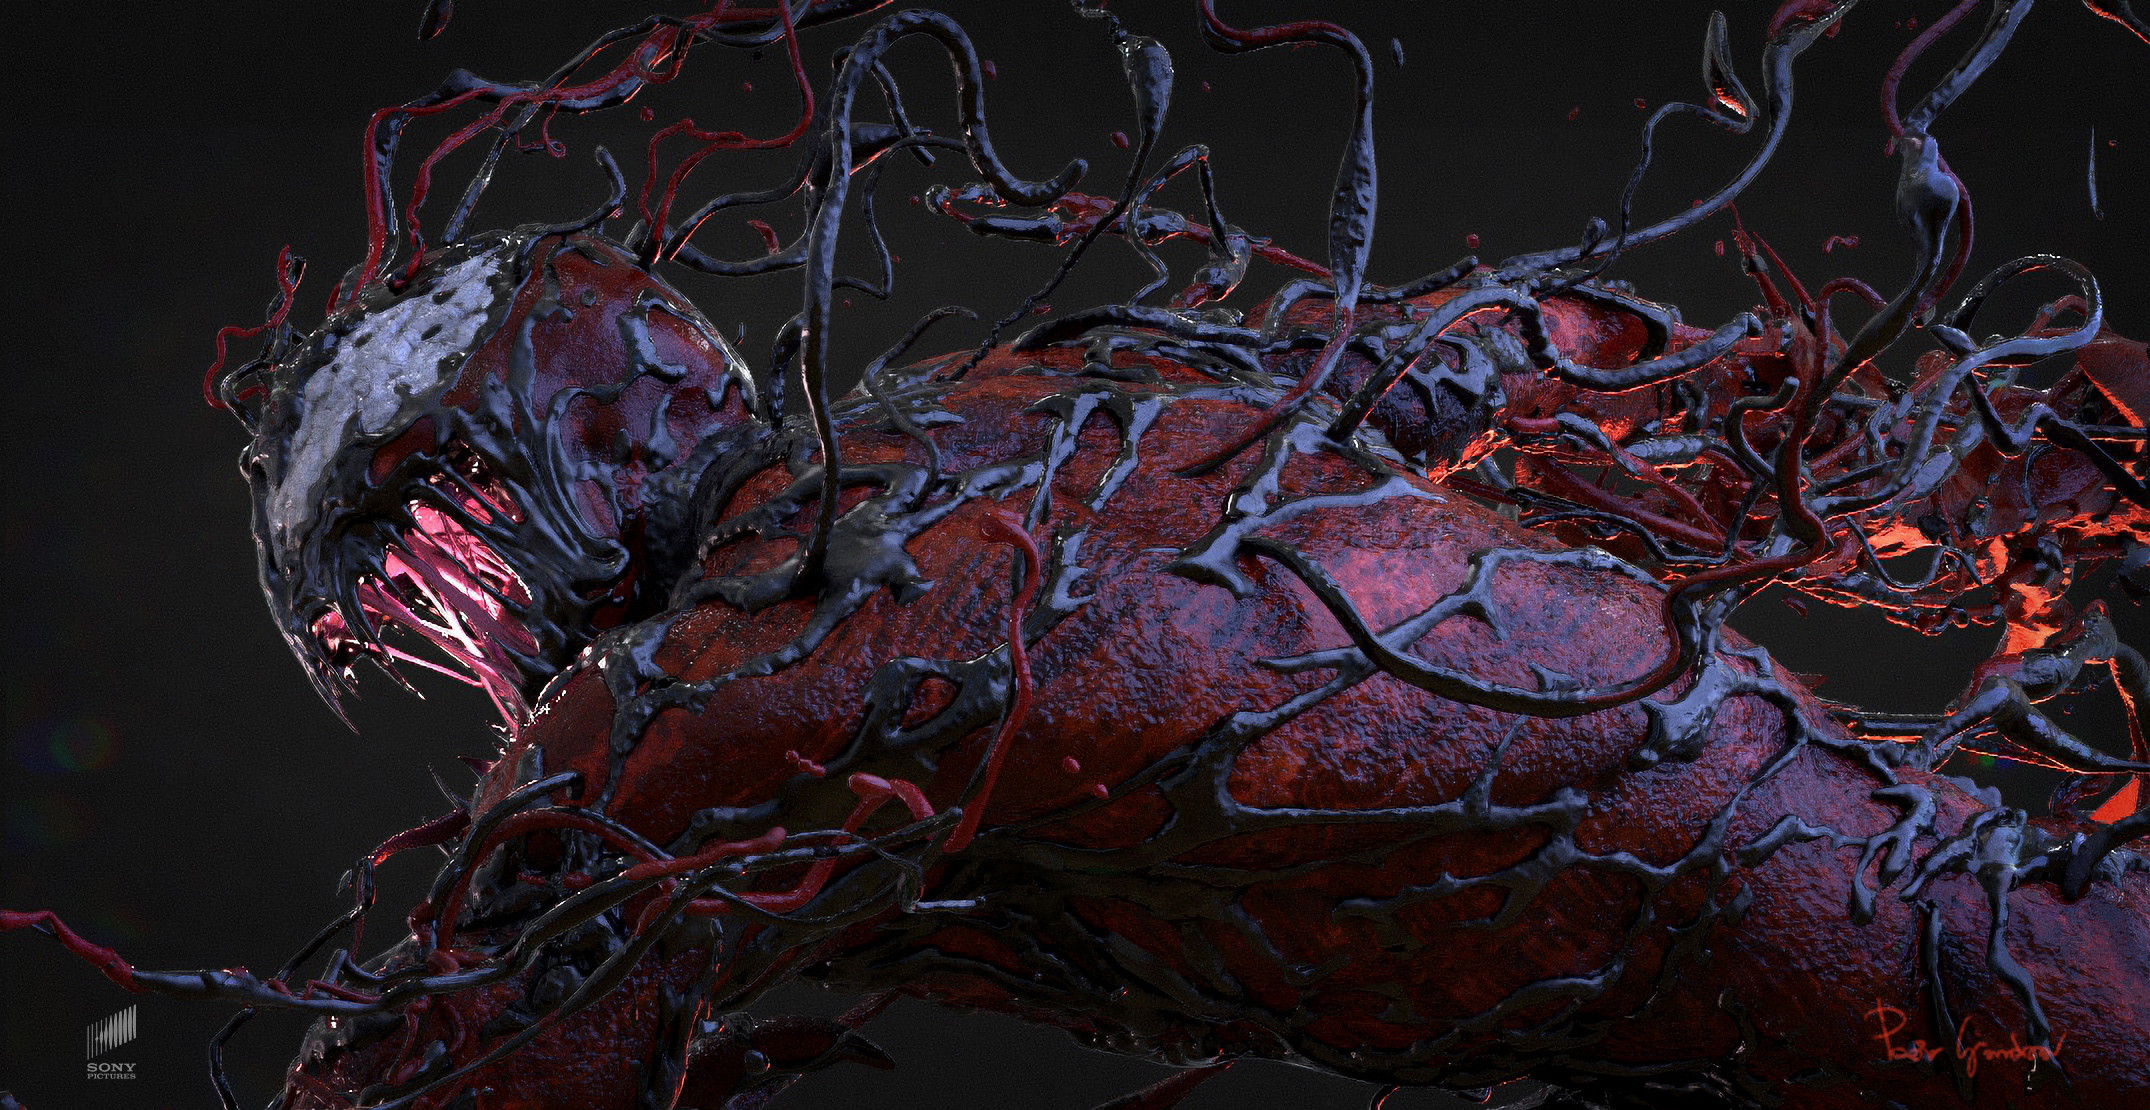 I put together this scene of Carnage fighting Venom, to explore how Carnie's tendril could swirl around him and show his inner chaos. 